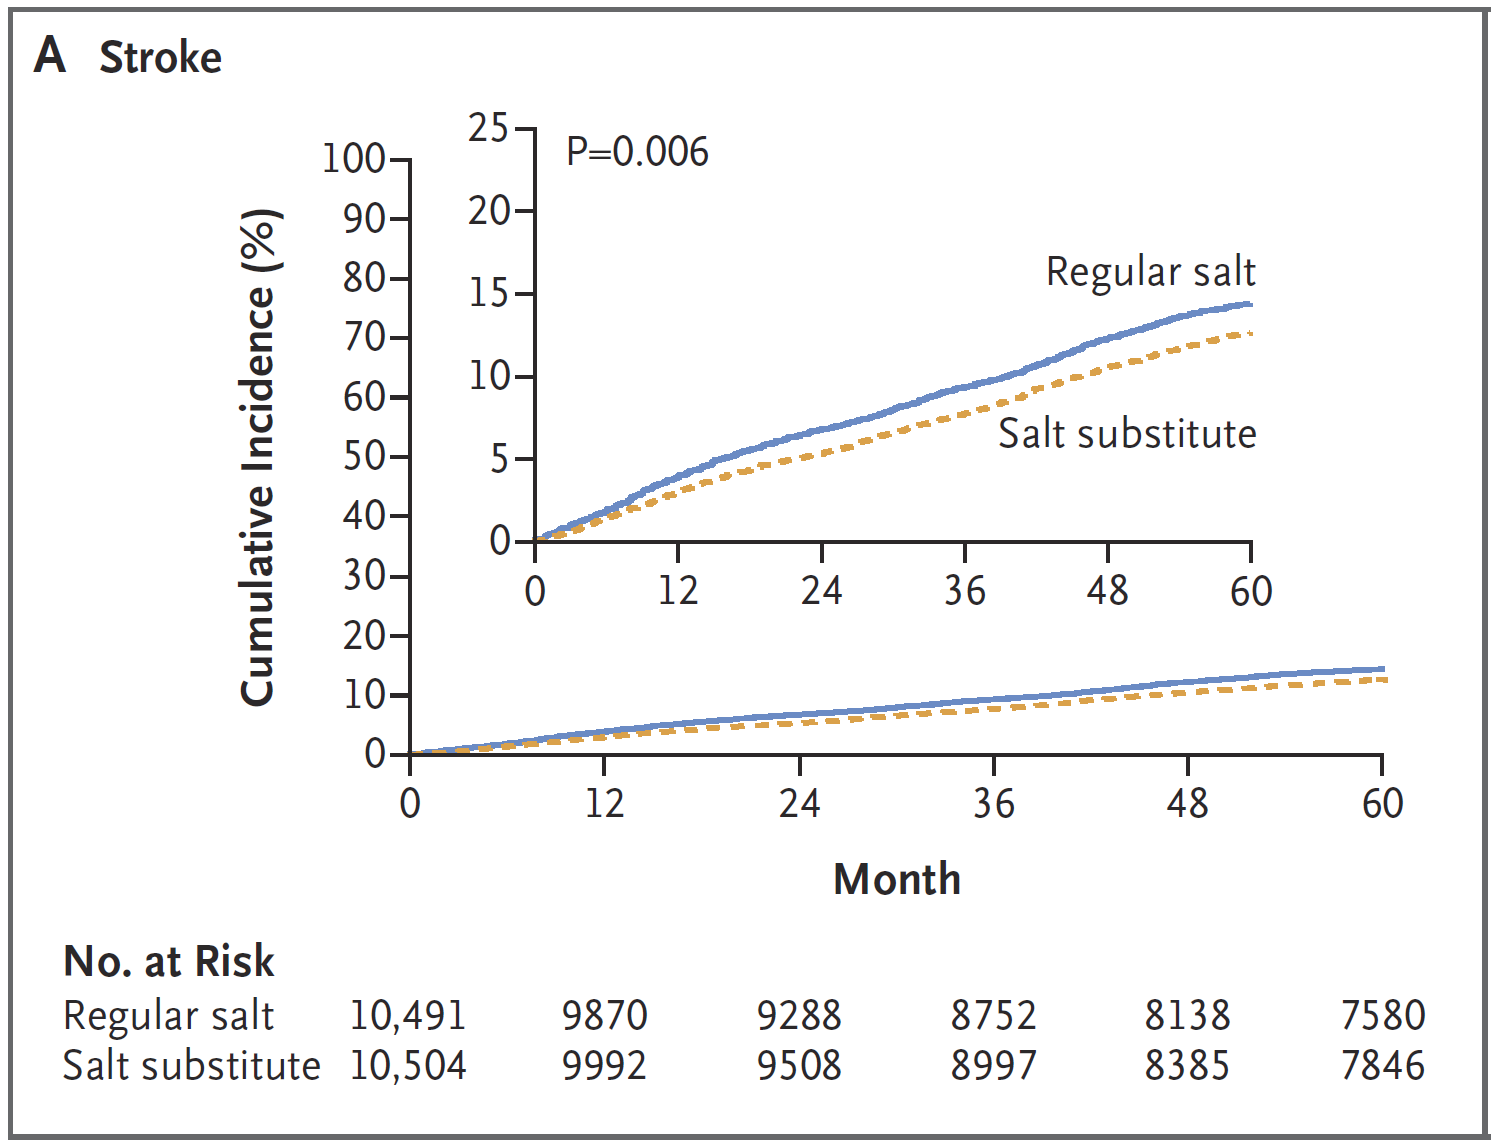 Salt Less, Live Longer: Results of the Salt Substitute and Stroke Study -  American College of Cardiology